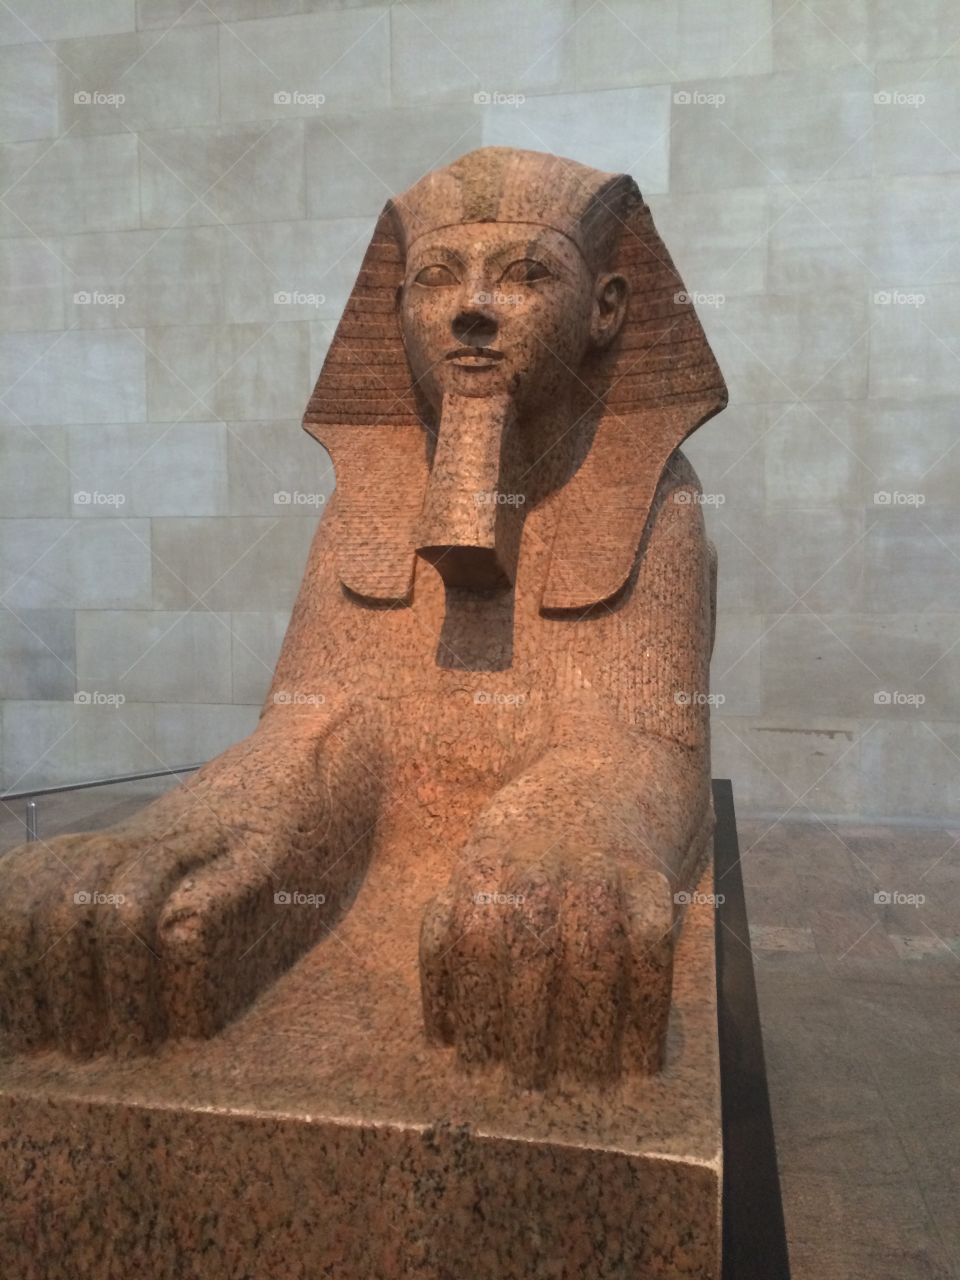 Egyptian sculpture in the metropolitan museum NYC